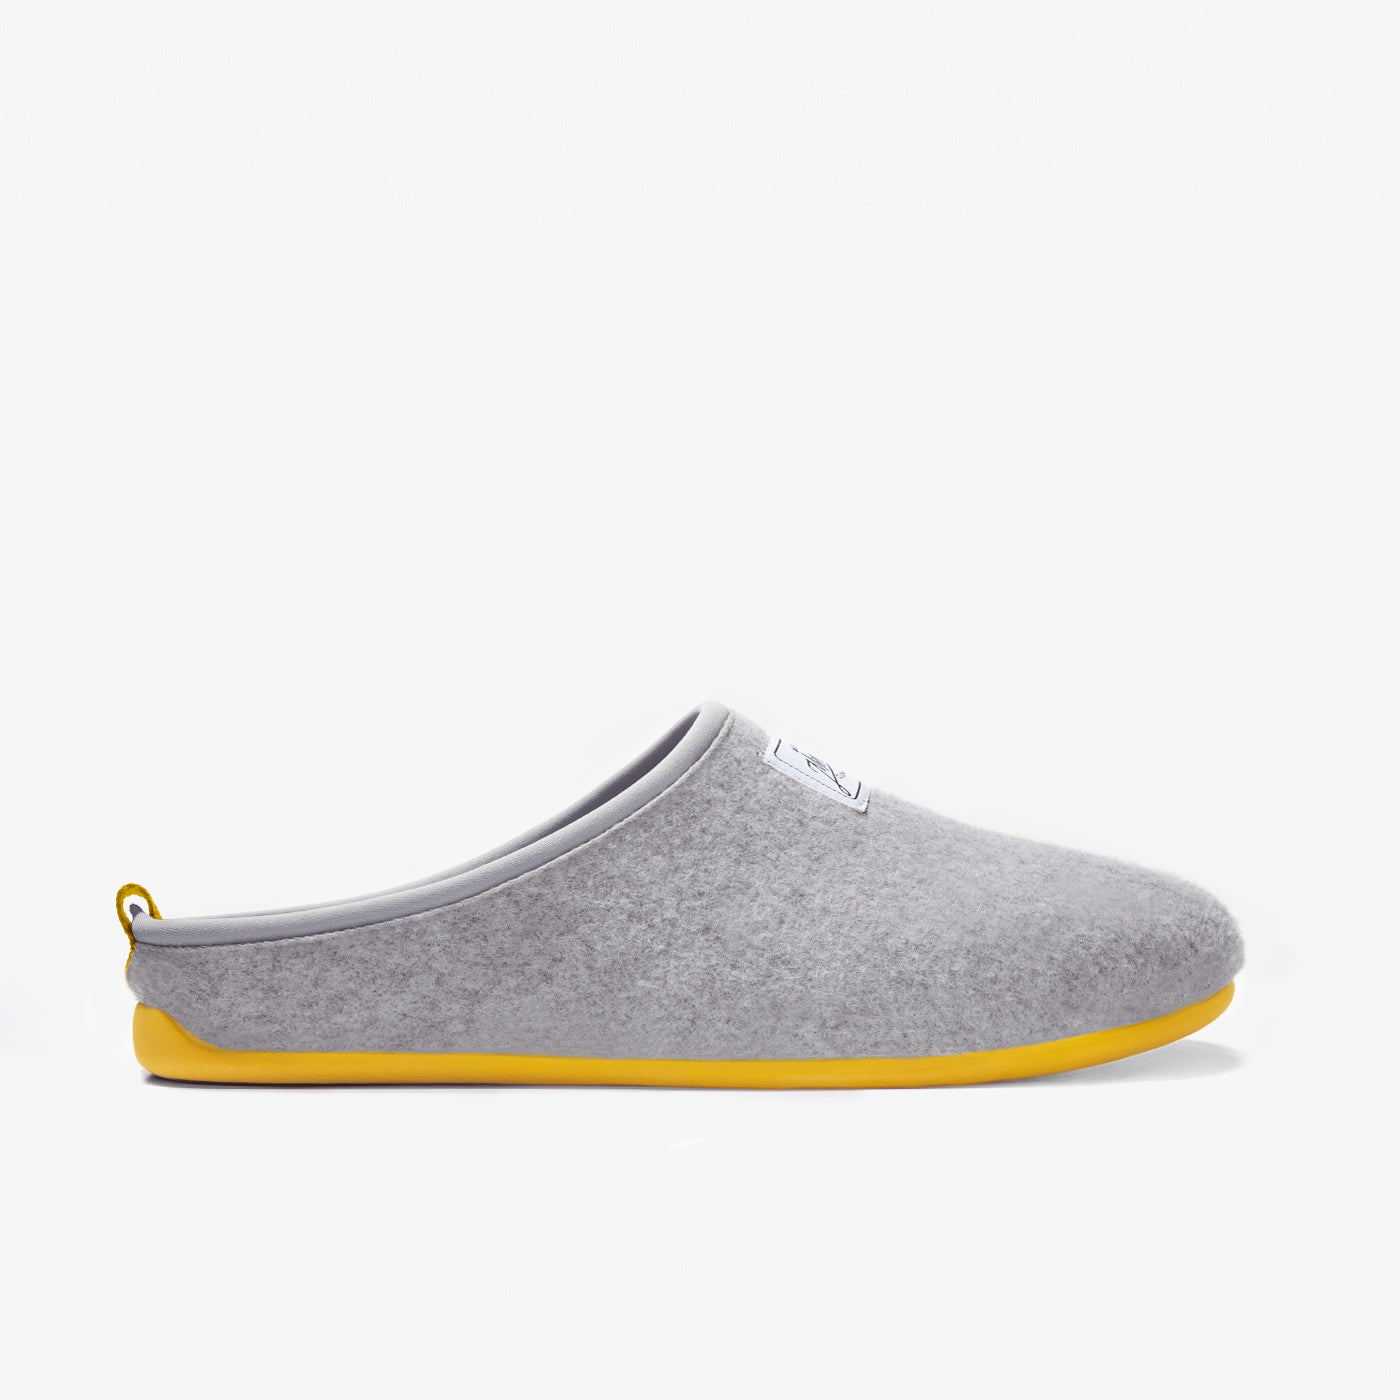 Mercredy Slippers - Ladies - Grey with Yellow Sole